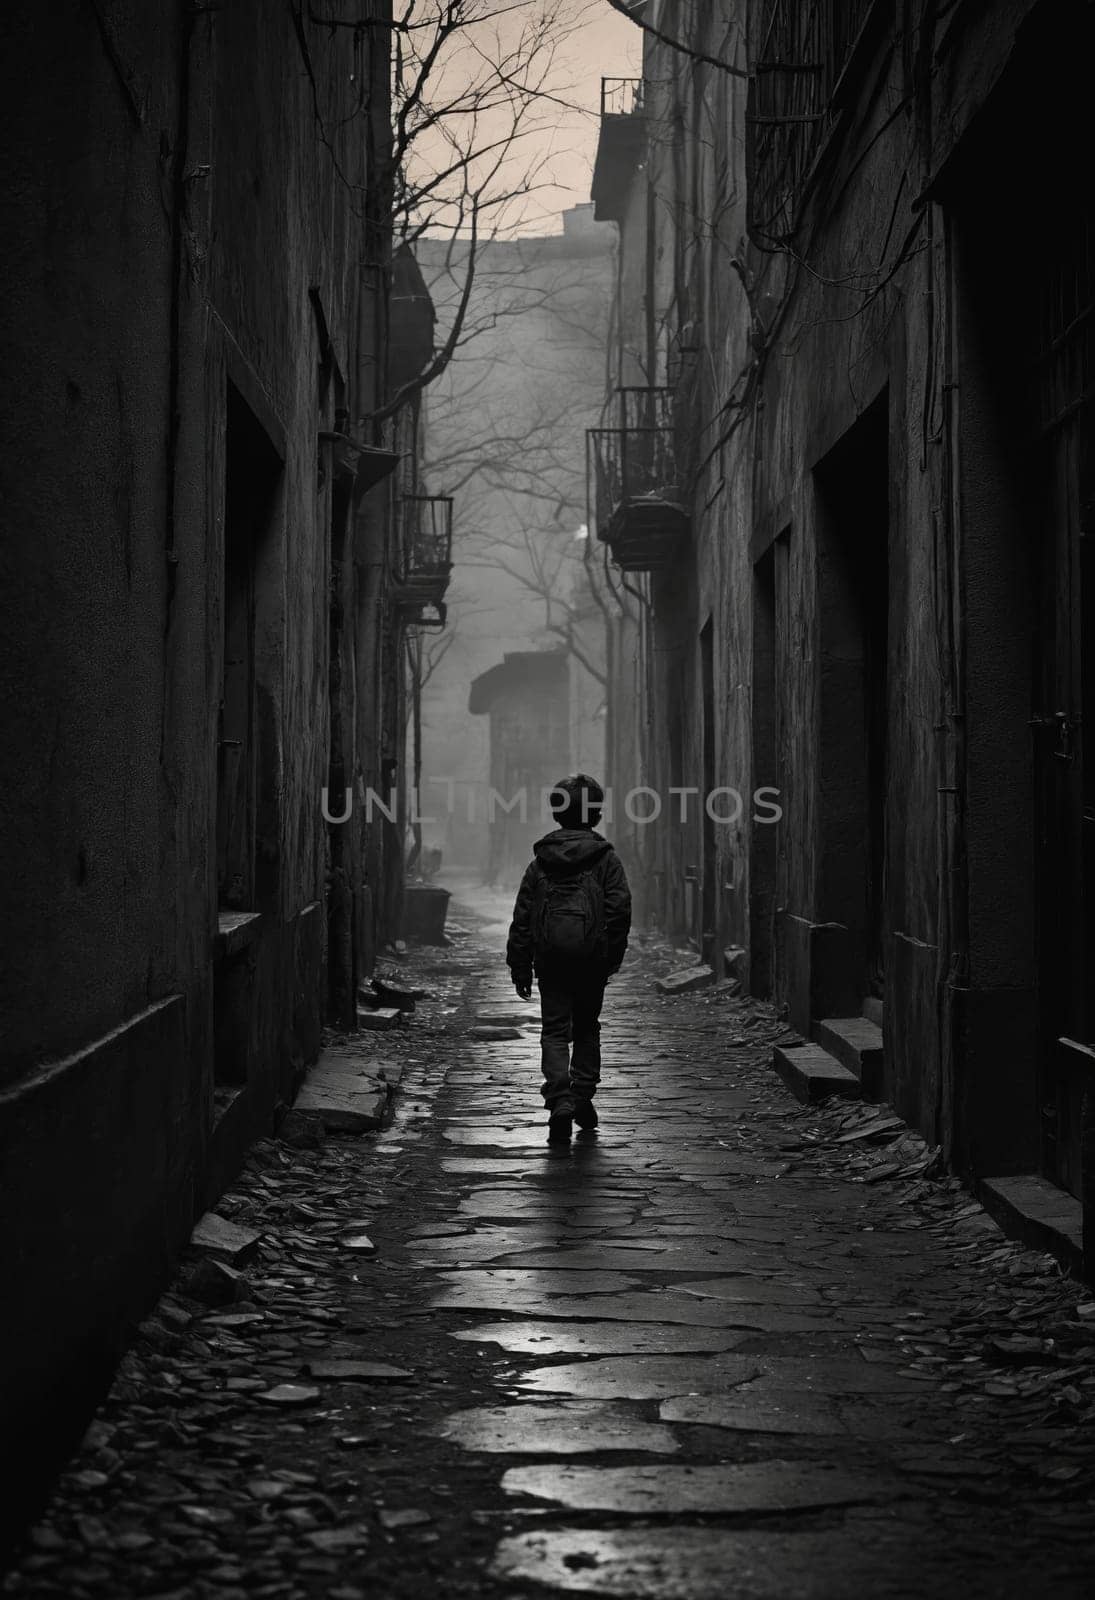 A boy walks in a dark alley at midnight in a blackandwhite photo by Andre1ns